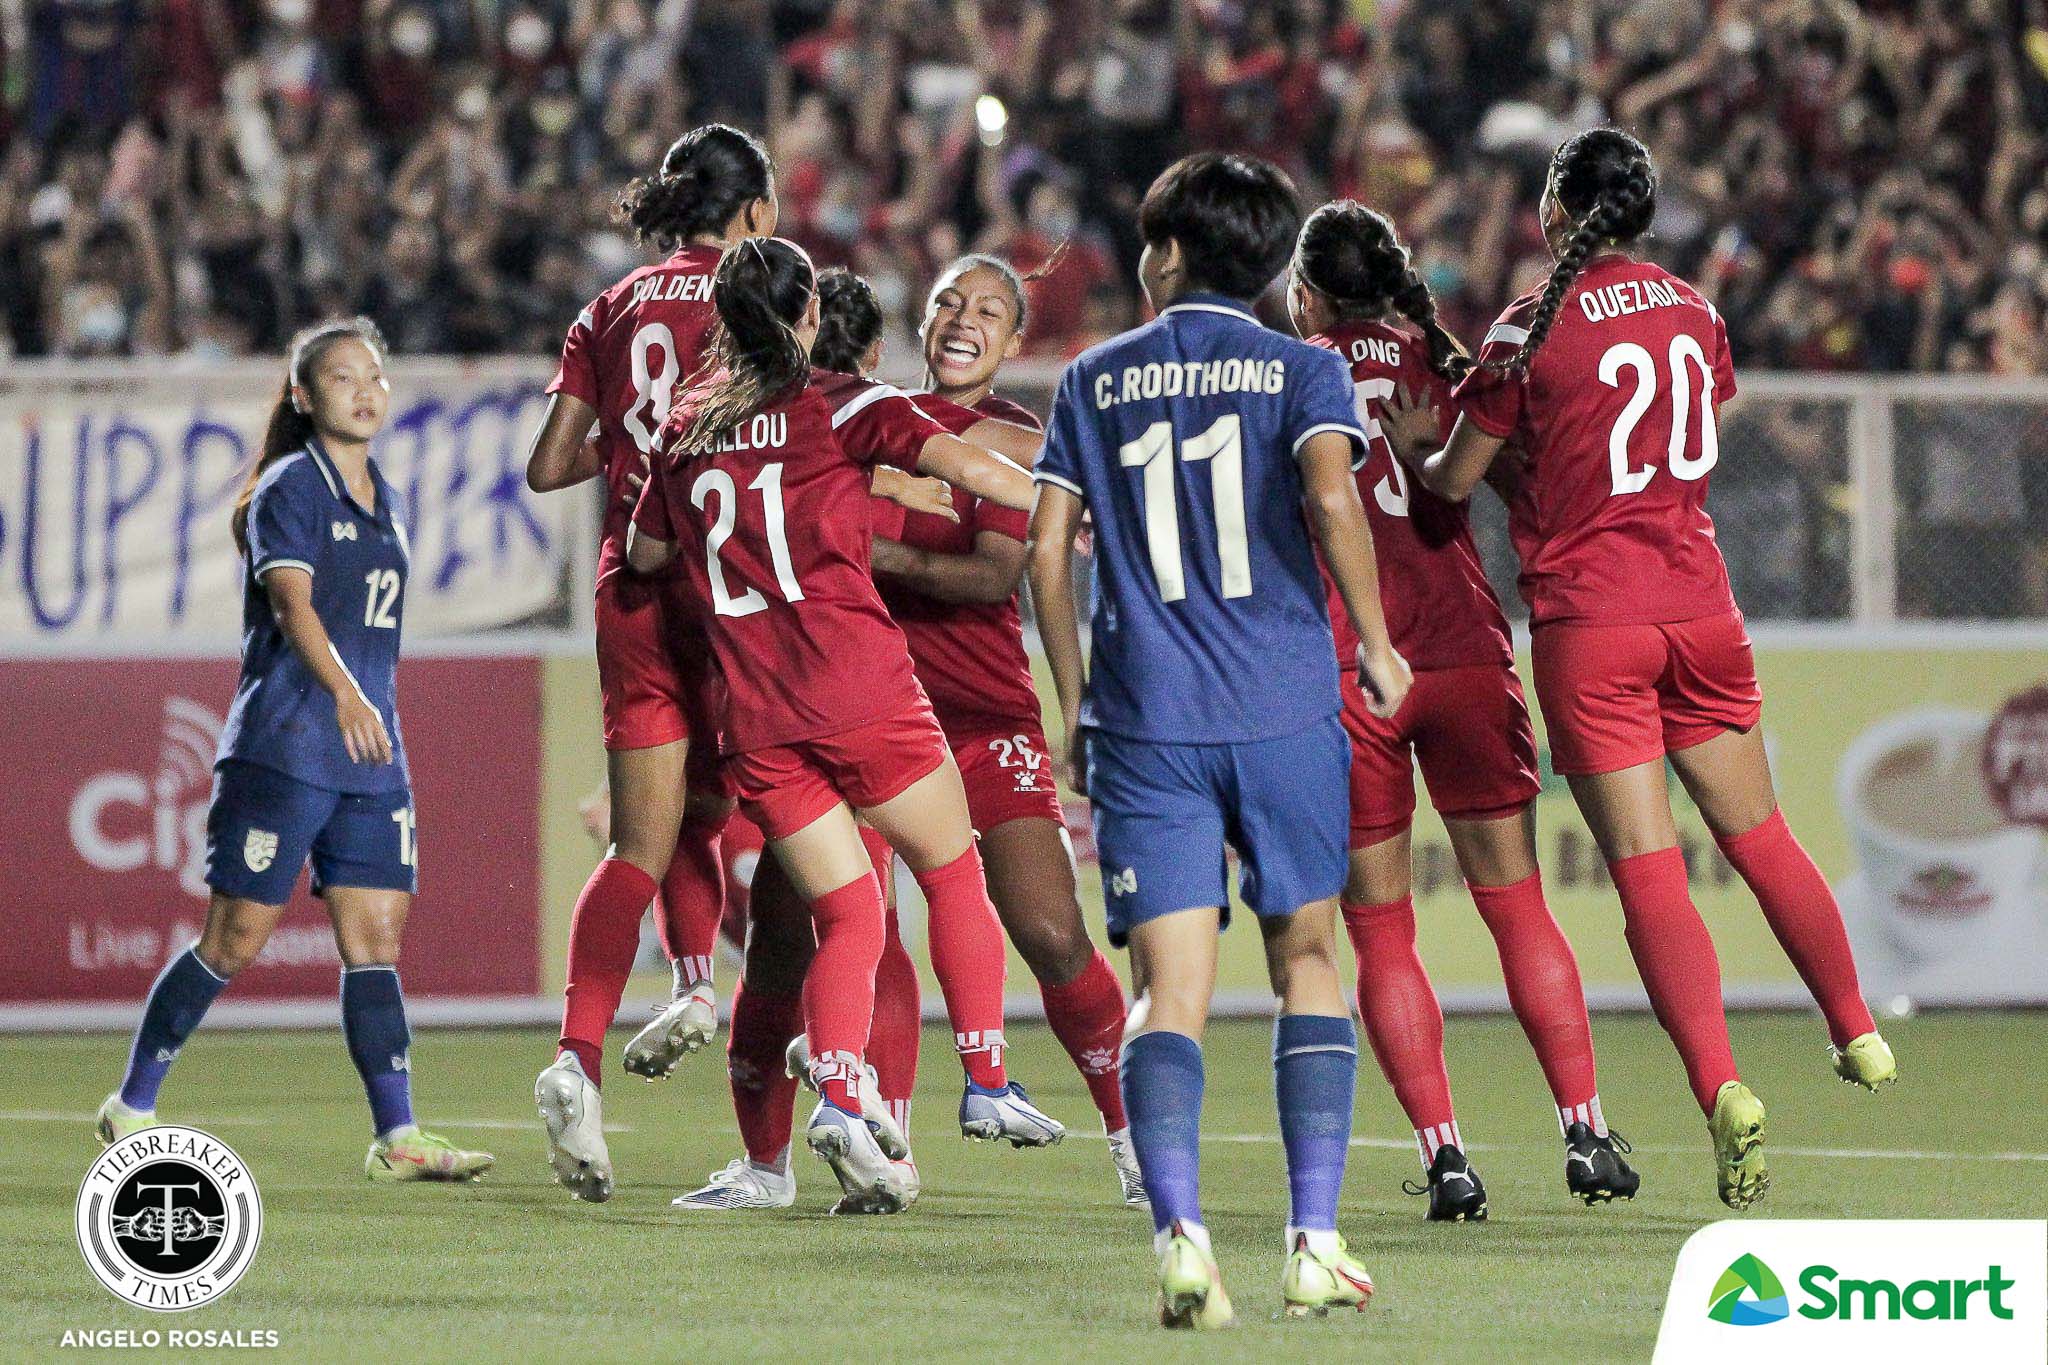 2022-AFF-Womens-Championship-Philippines-vs-Thailand-Finals-PH-Celeb-2 Guillou hopes AFF win inspires new generation of Filipinas 2022 AFF Women’s Championship Football News Philippine Azkals  - philippine sports news